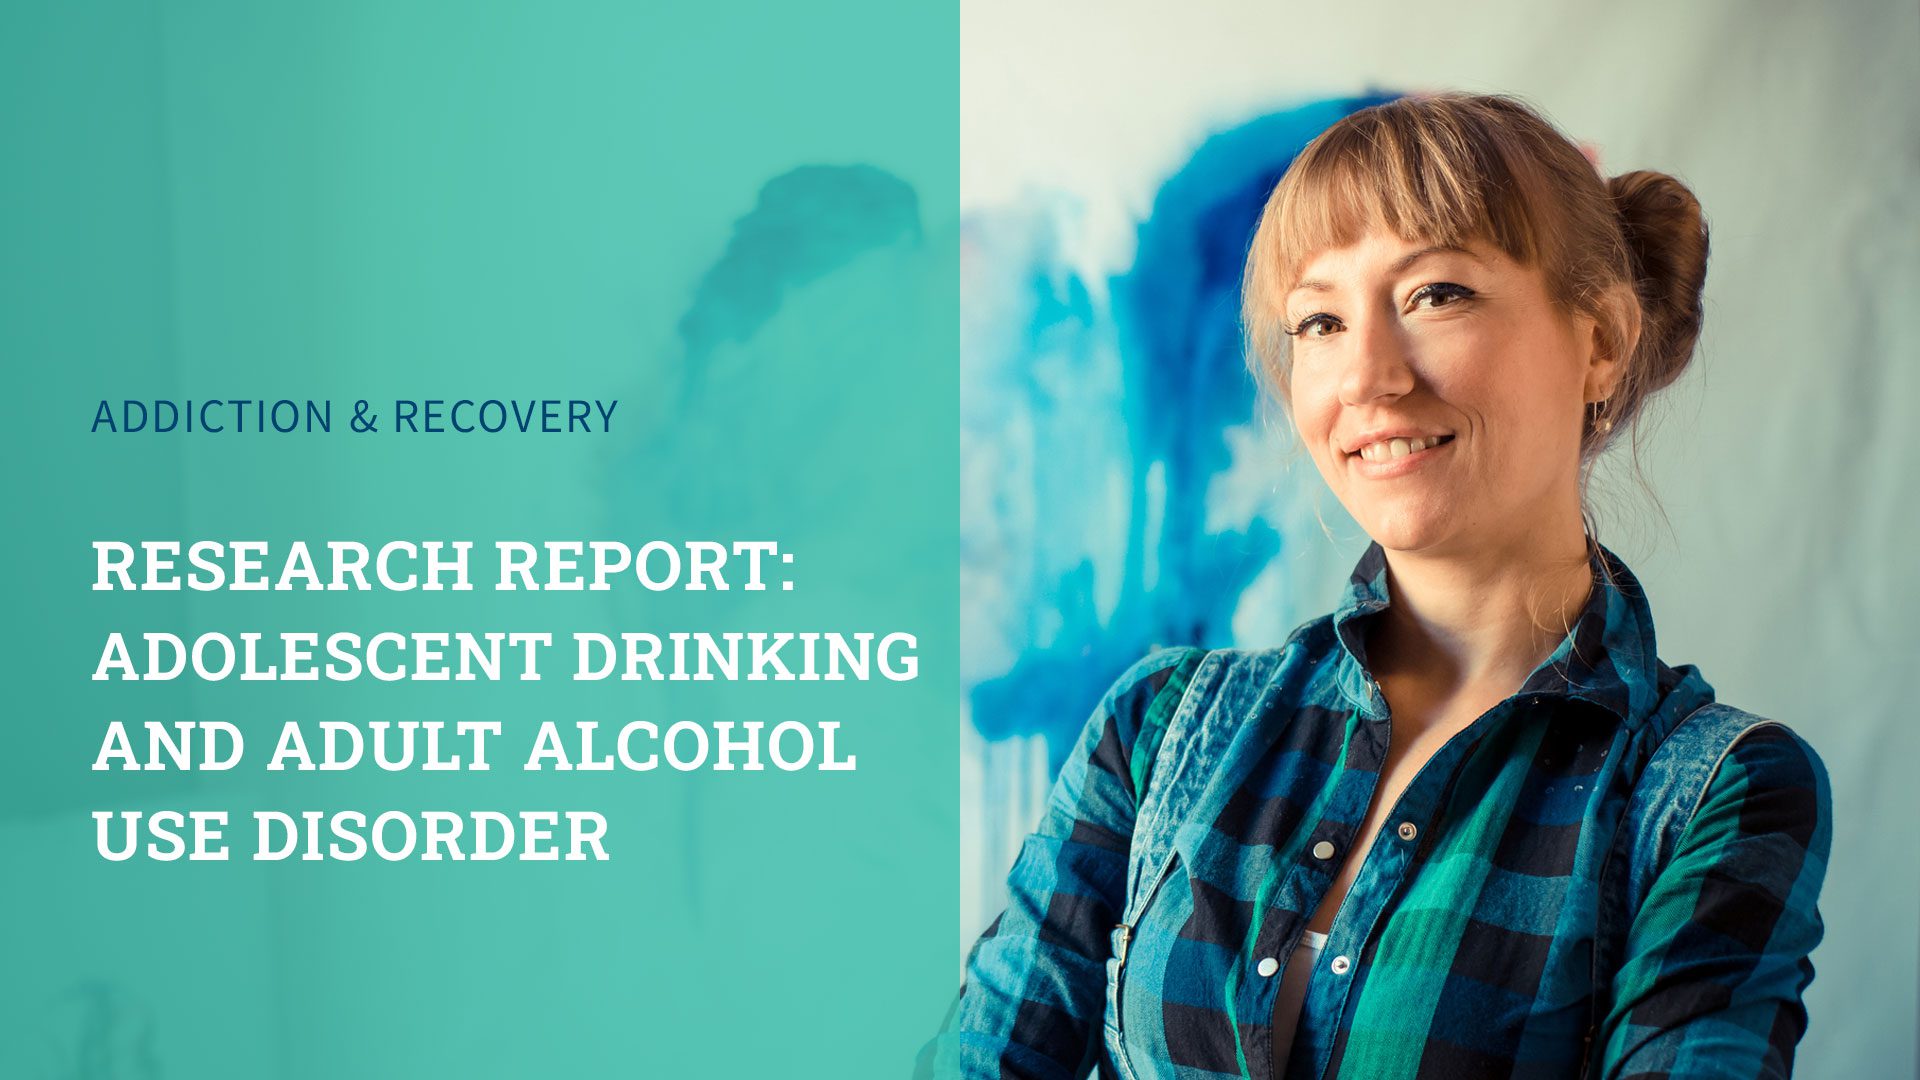 Research Report: Adolescent Drinking and Adult Alcohol Use Disorder